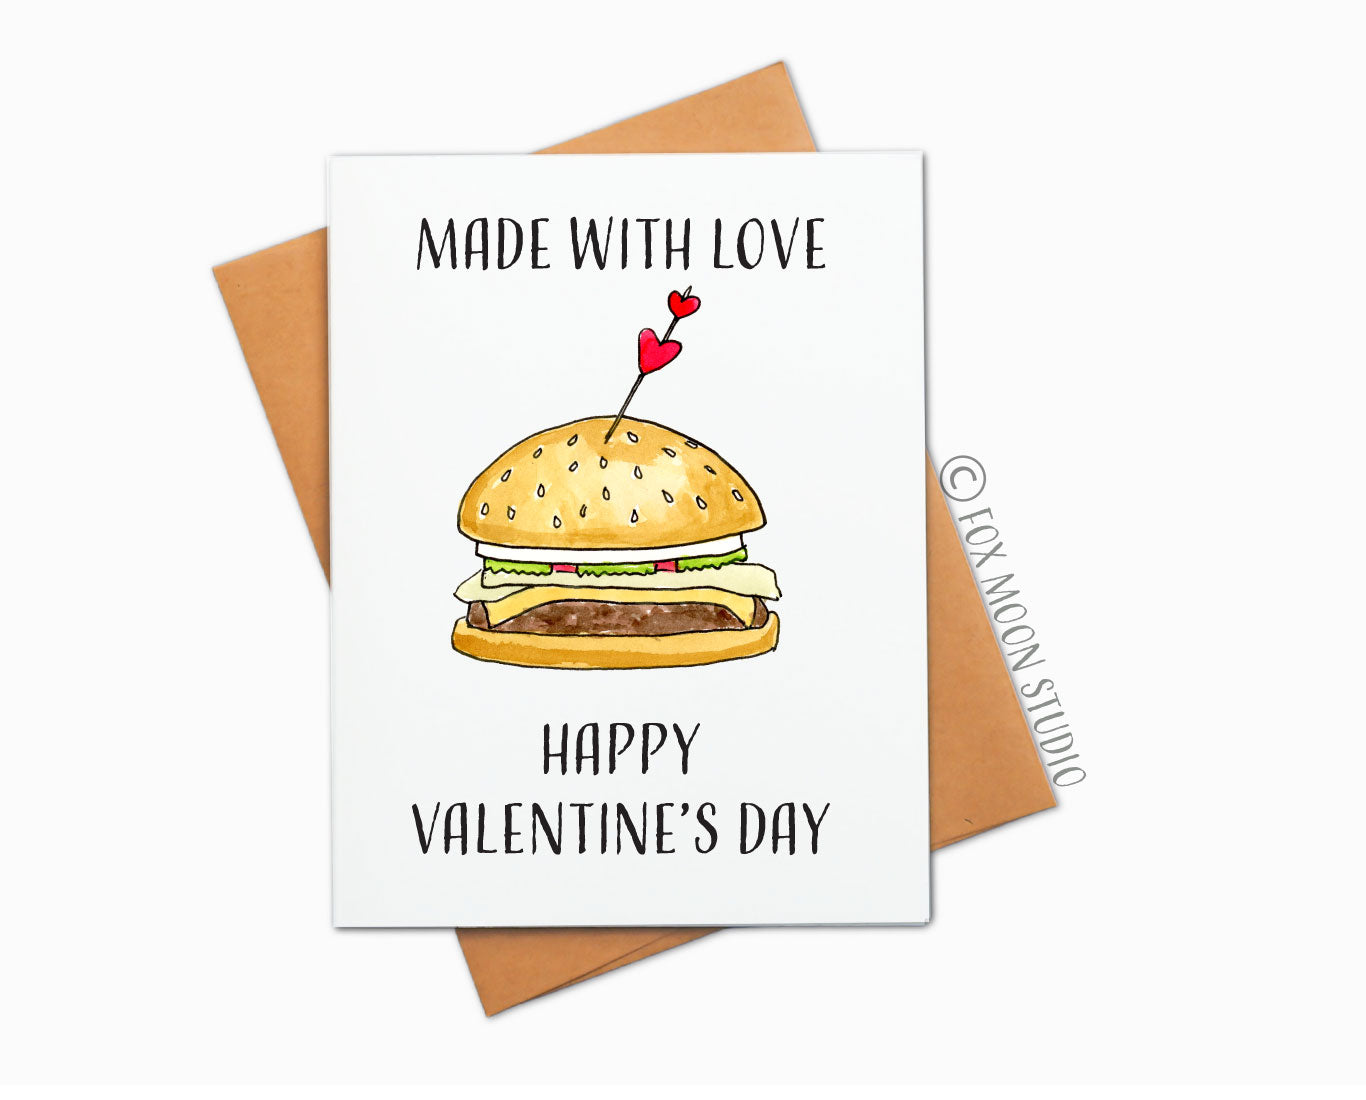 Made With Love - Happy Valentine's Day - Greeting Card for Foodies and Chefs